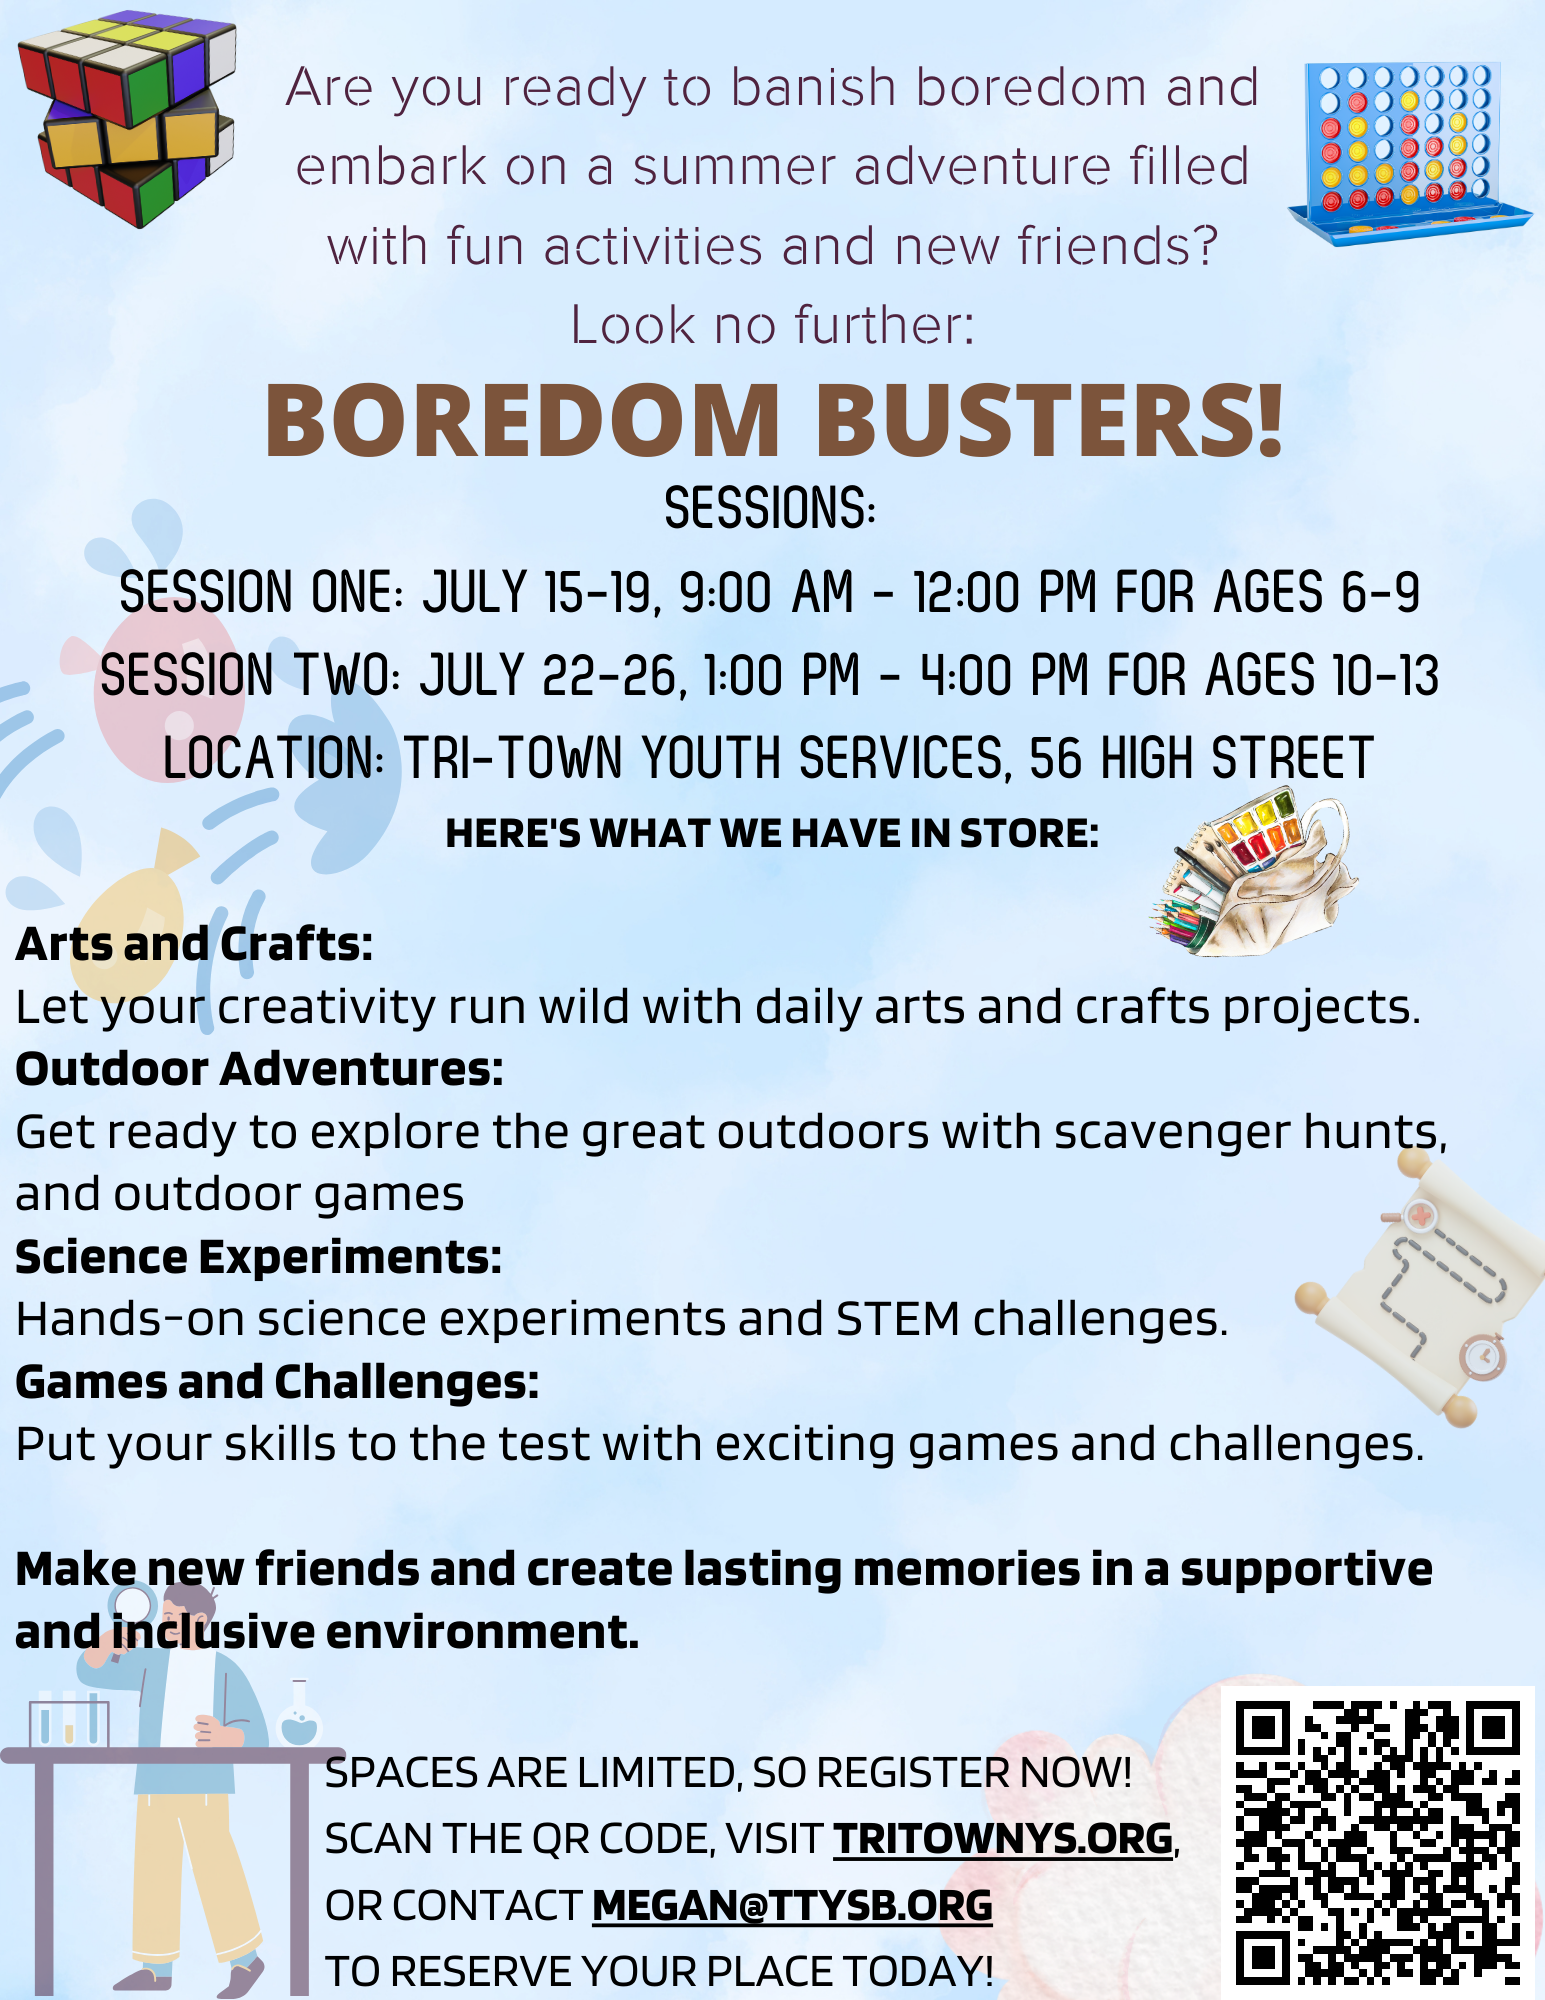 Session 2: Boredom Busters    